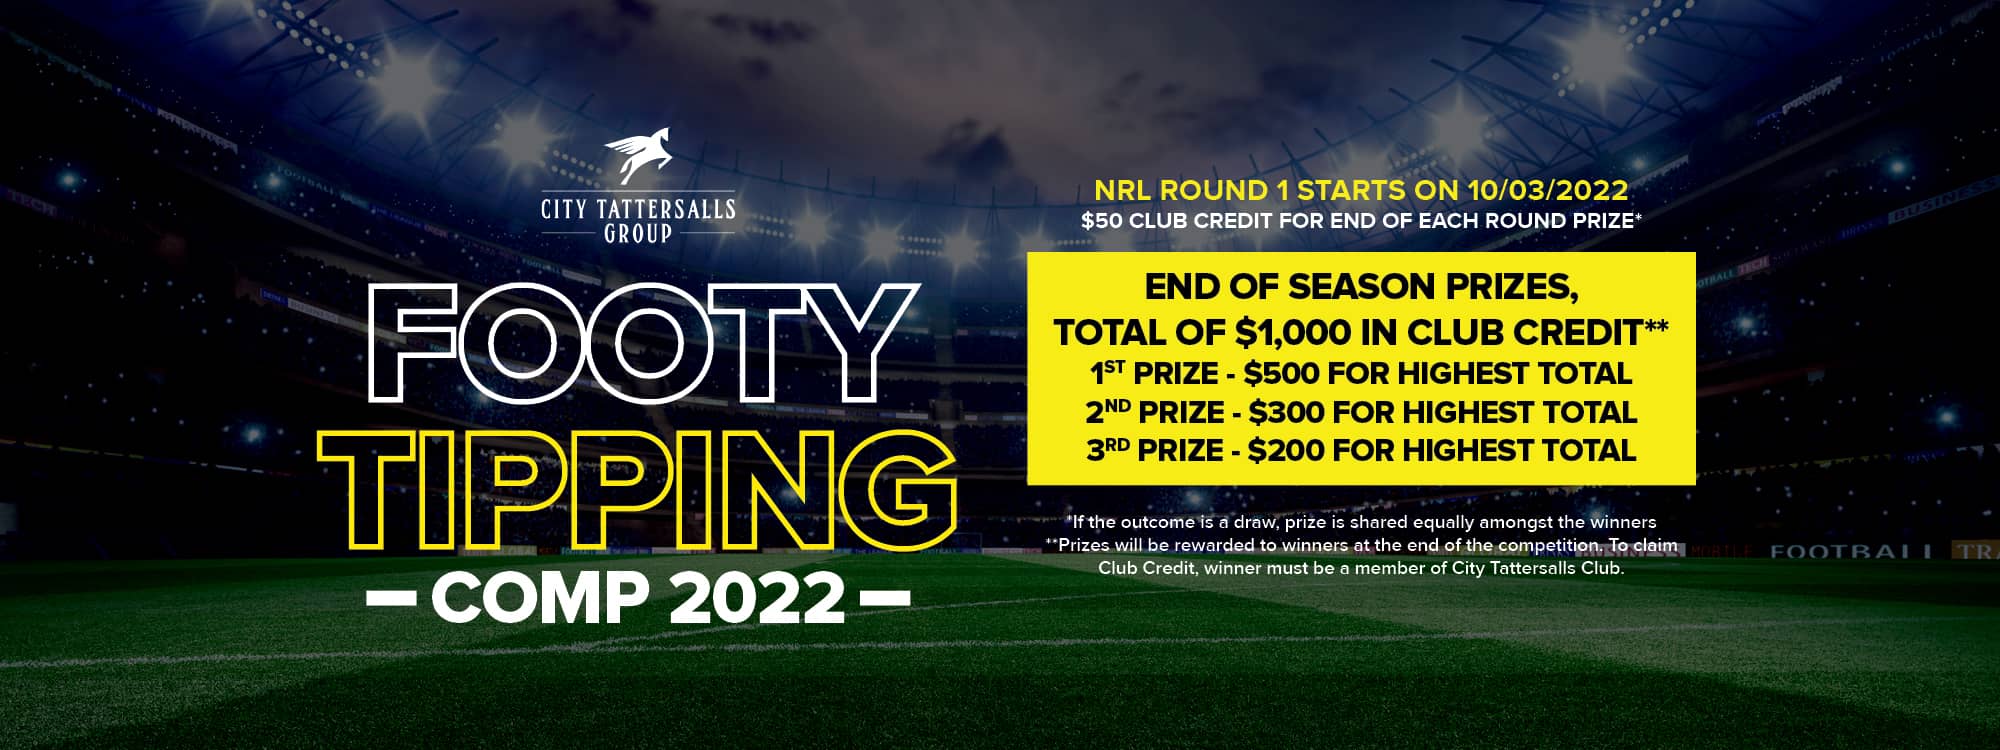 CTG Footy Tipping Comp